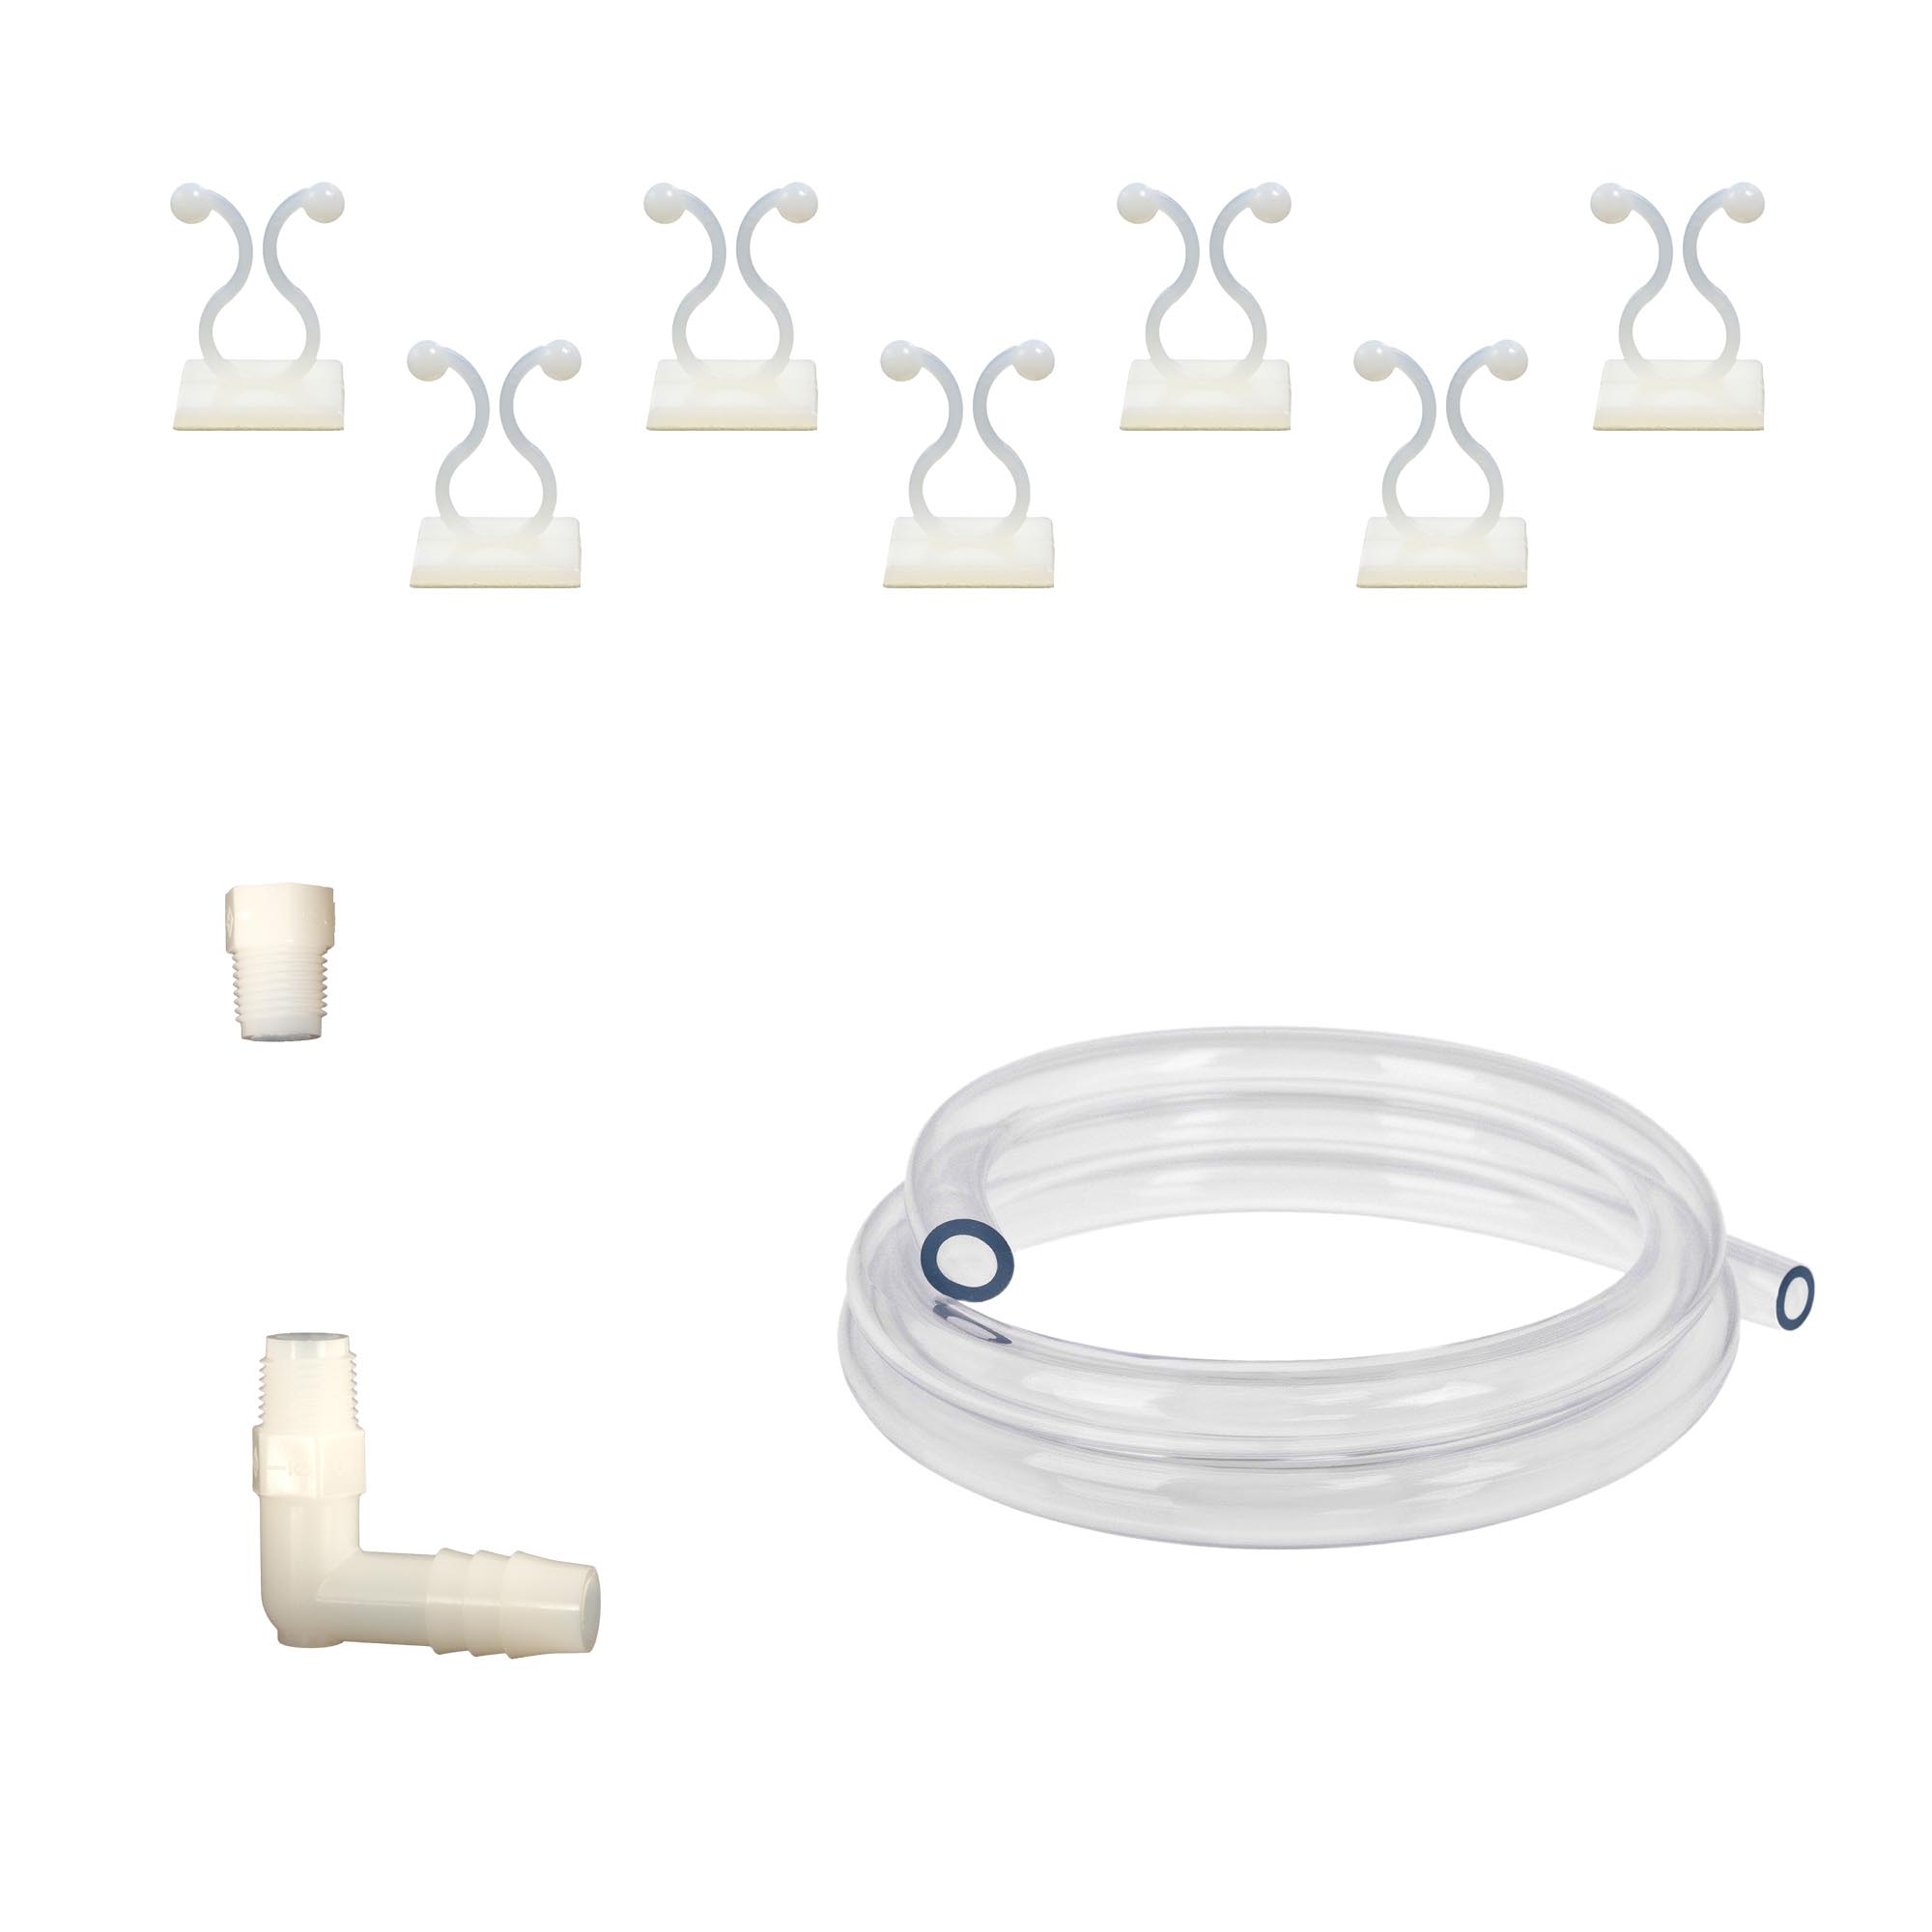 Cold Air Distribution Kit includes tubing, adhesive clips and fittings.